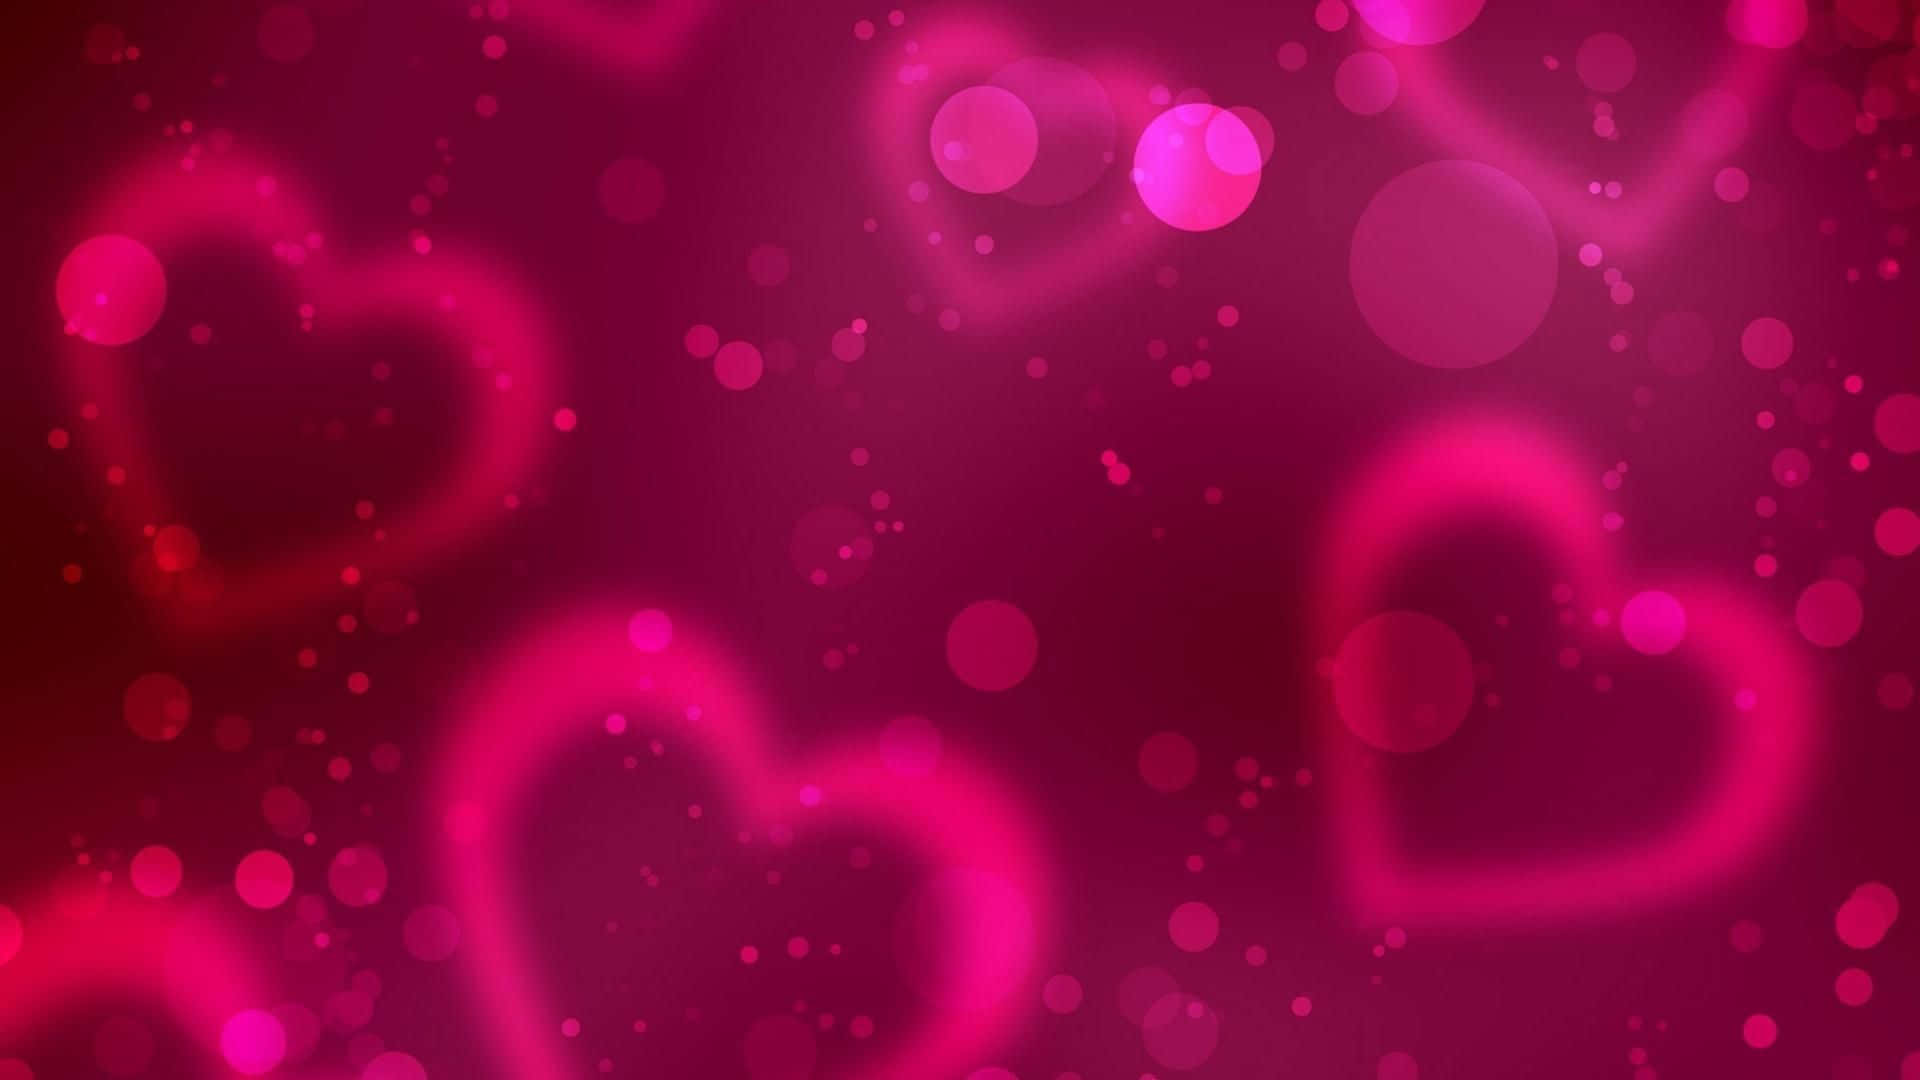 900+] Heart Background S For Free | Wallpapers.Com